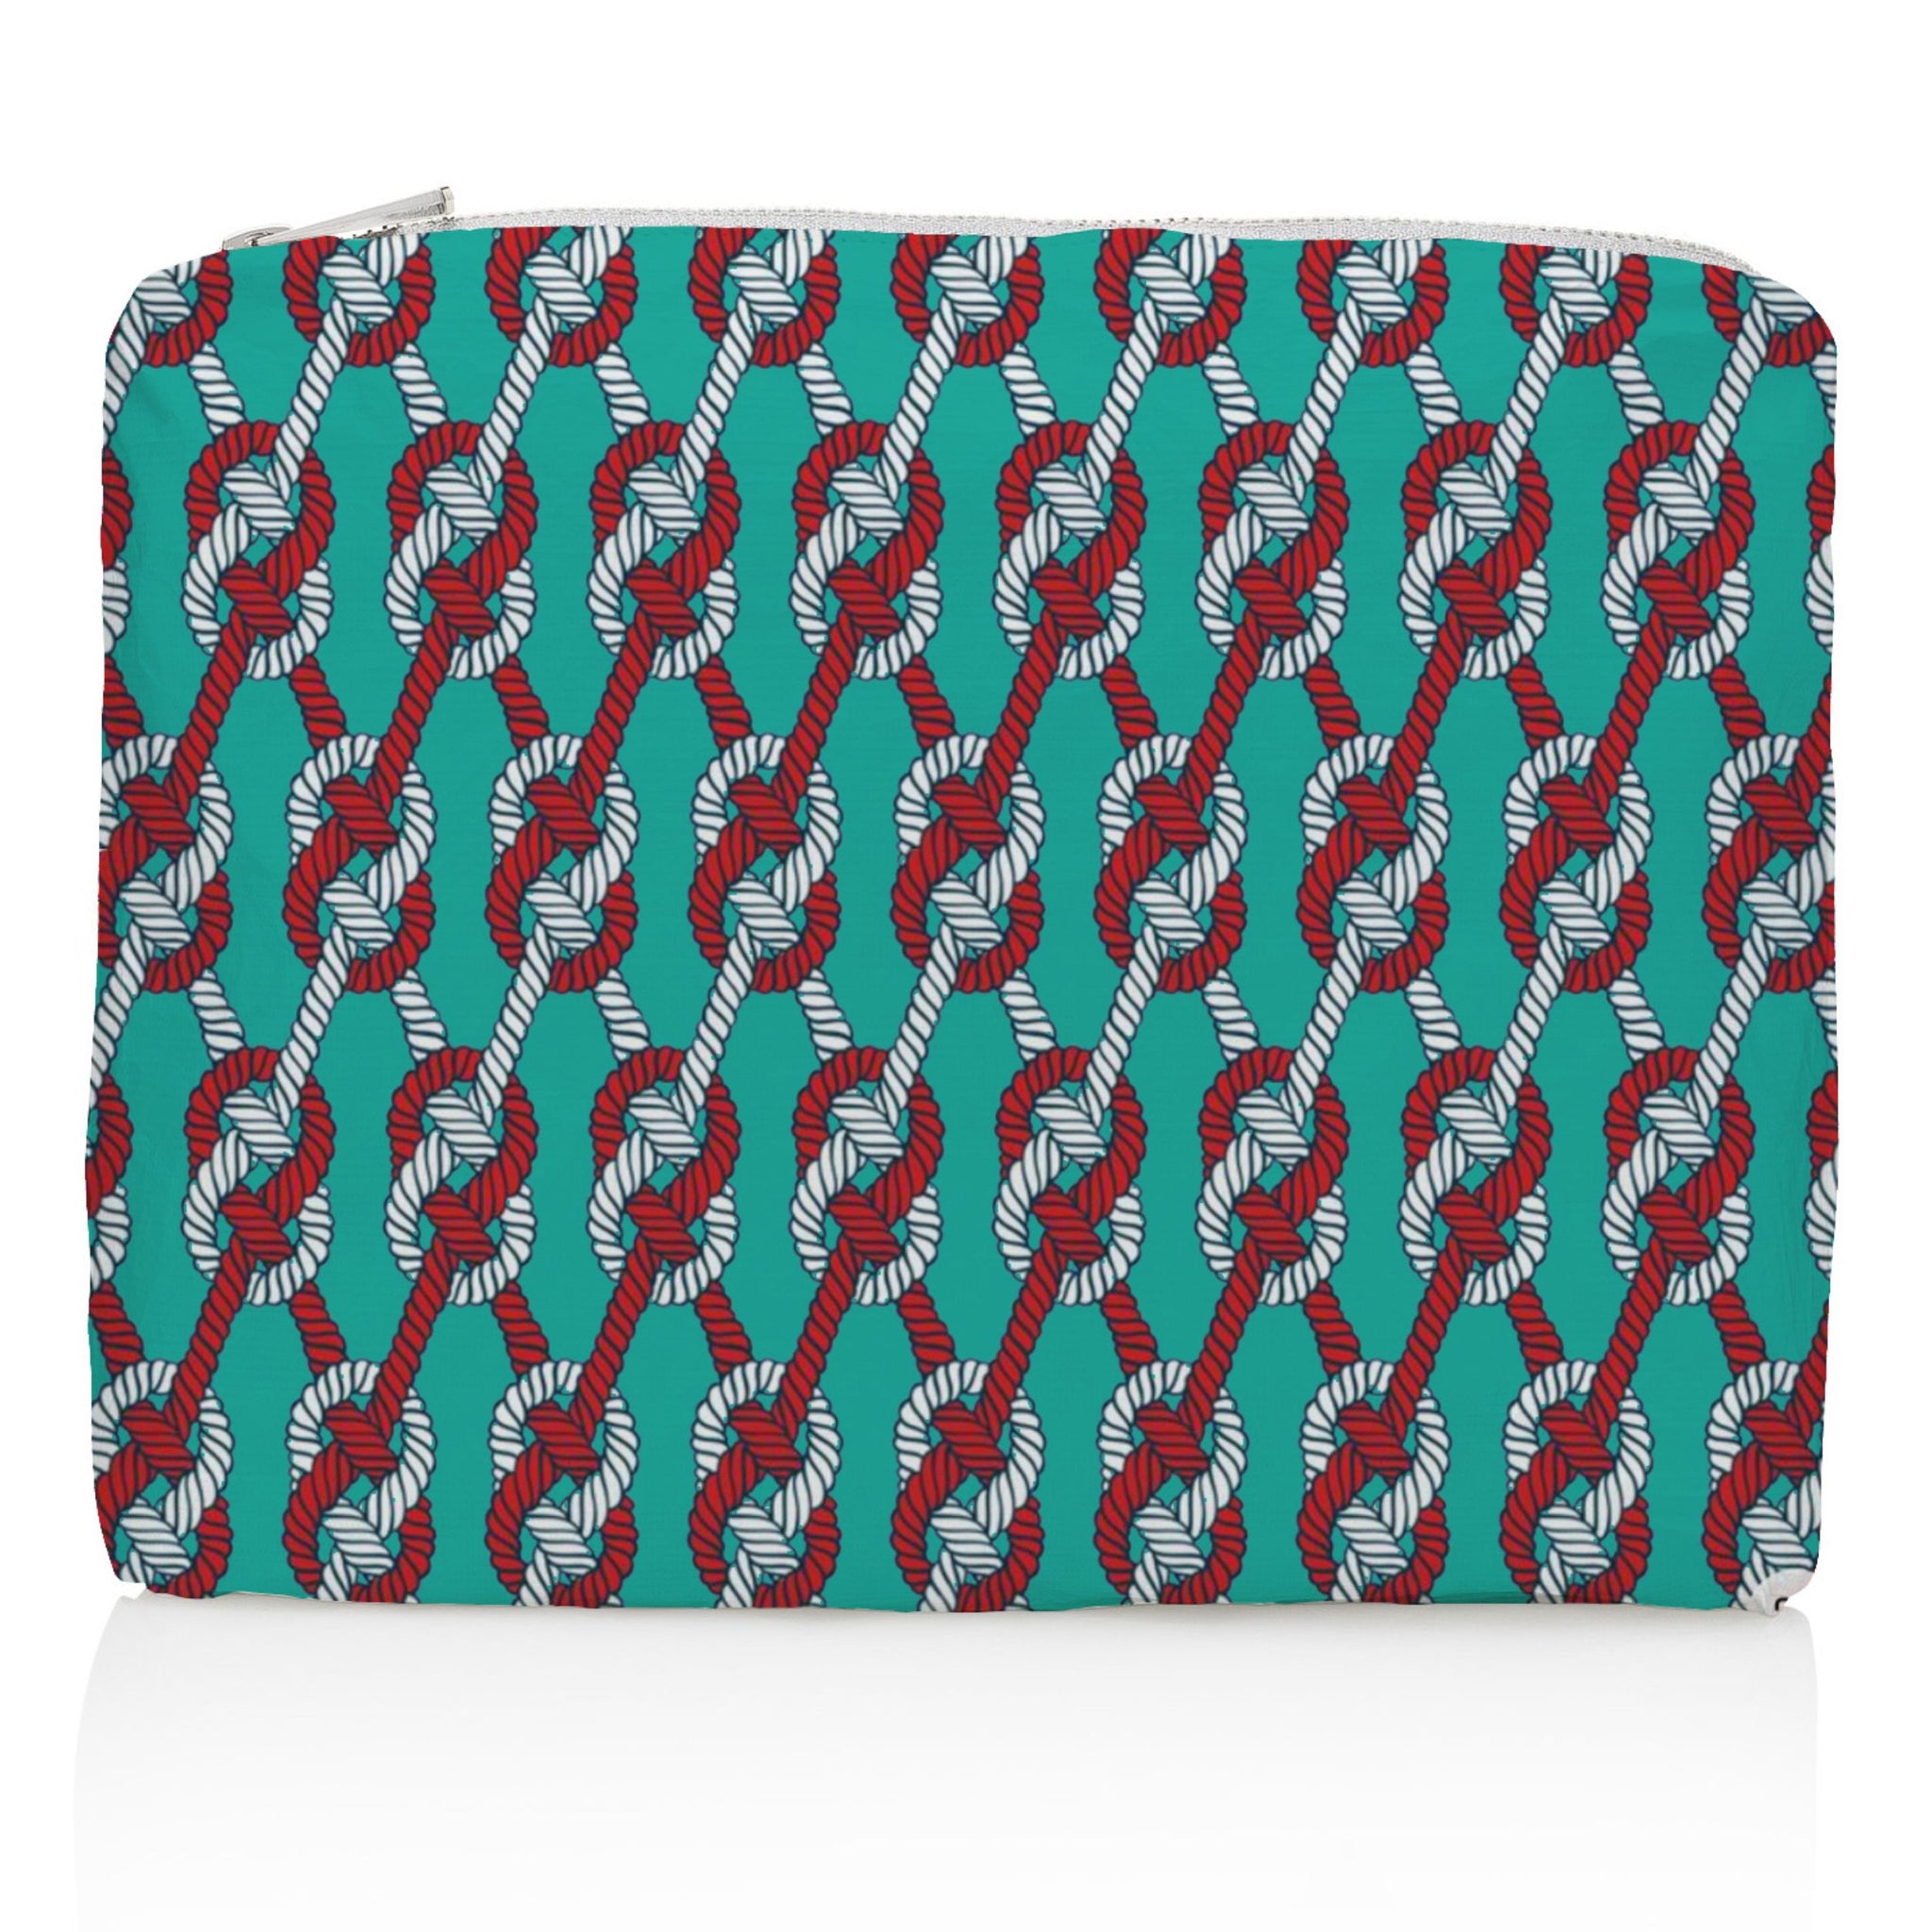 nautical medium zipper pouch in turquoise with red and white knots